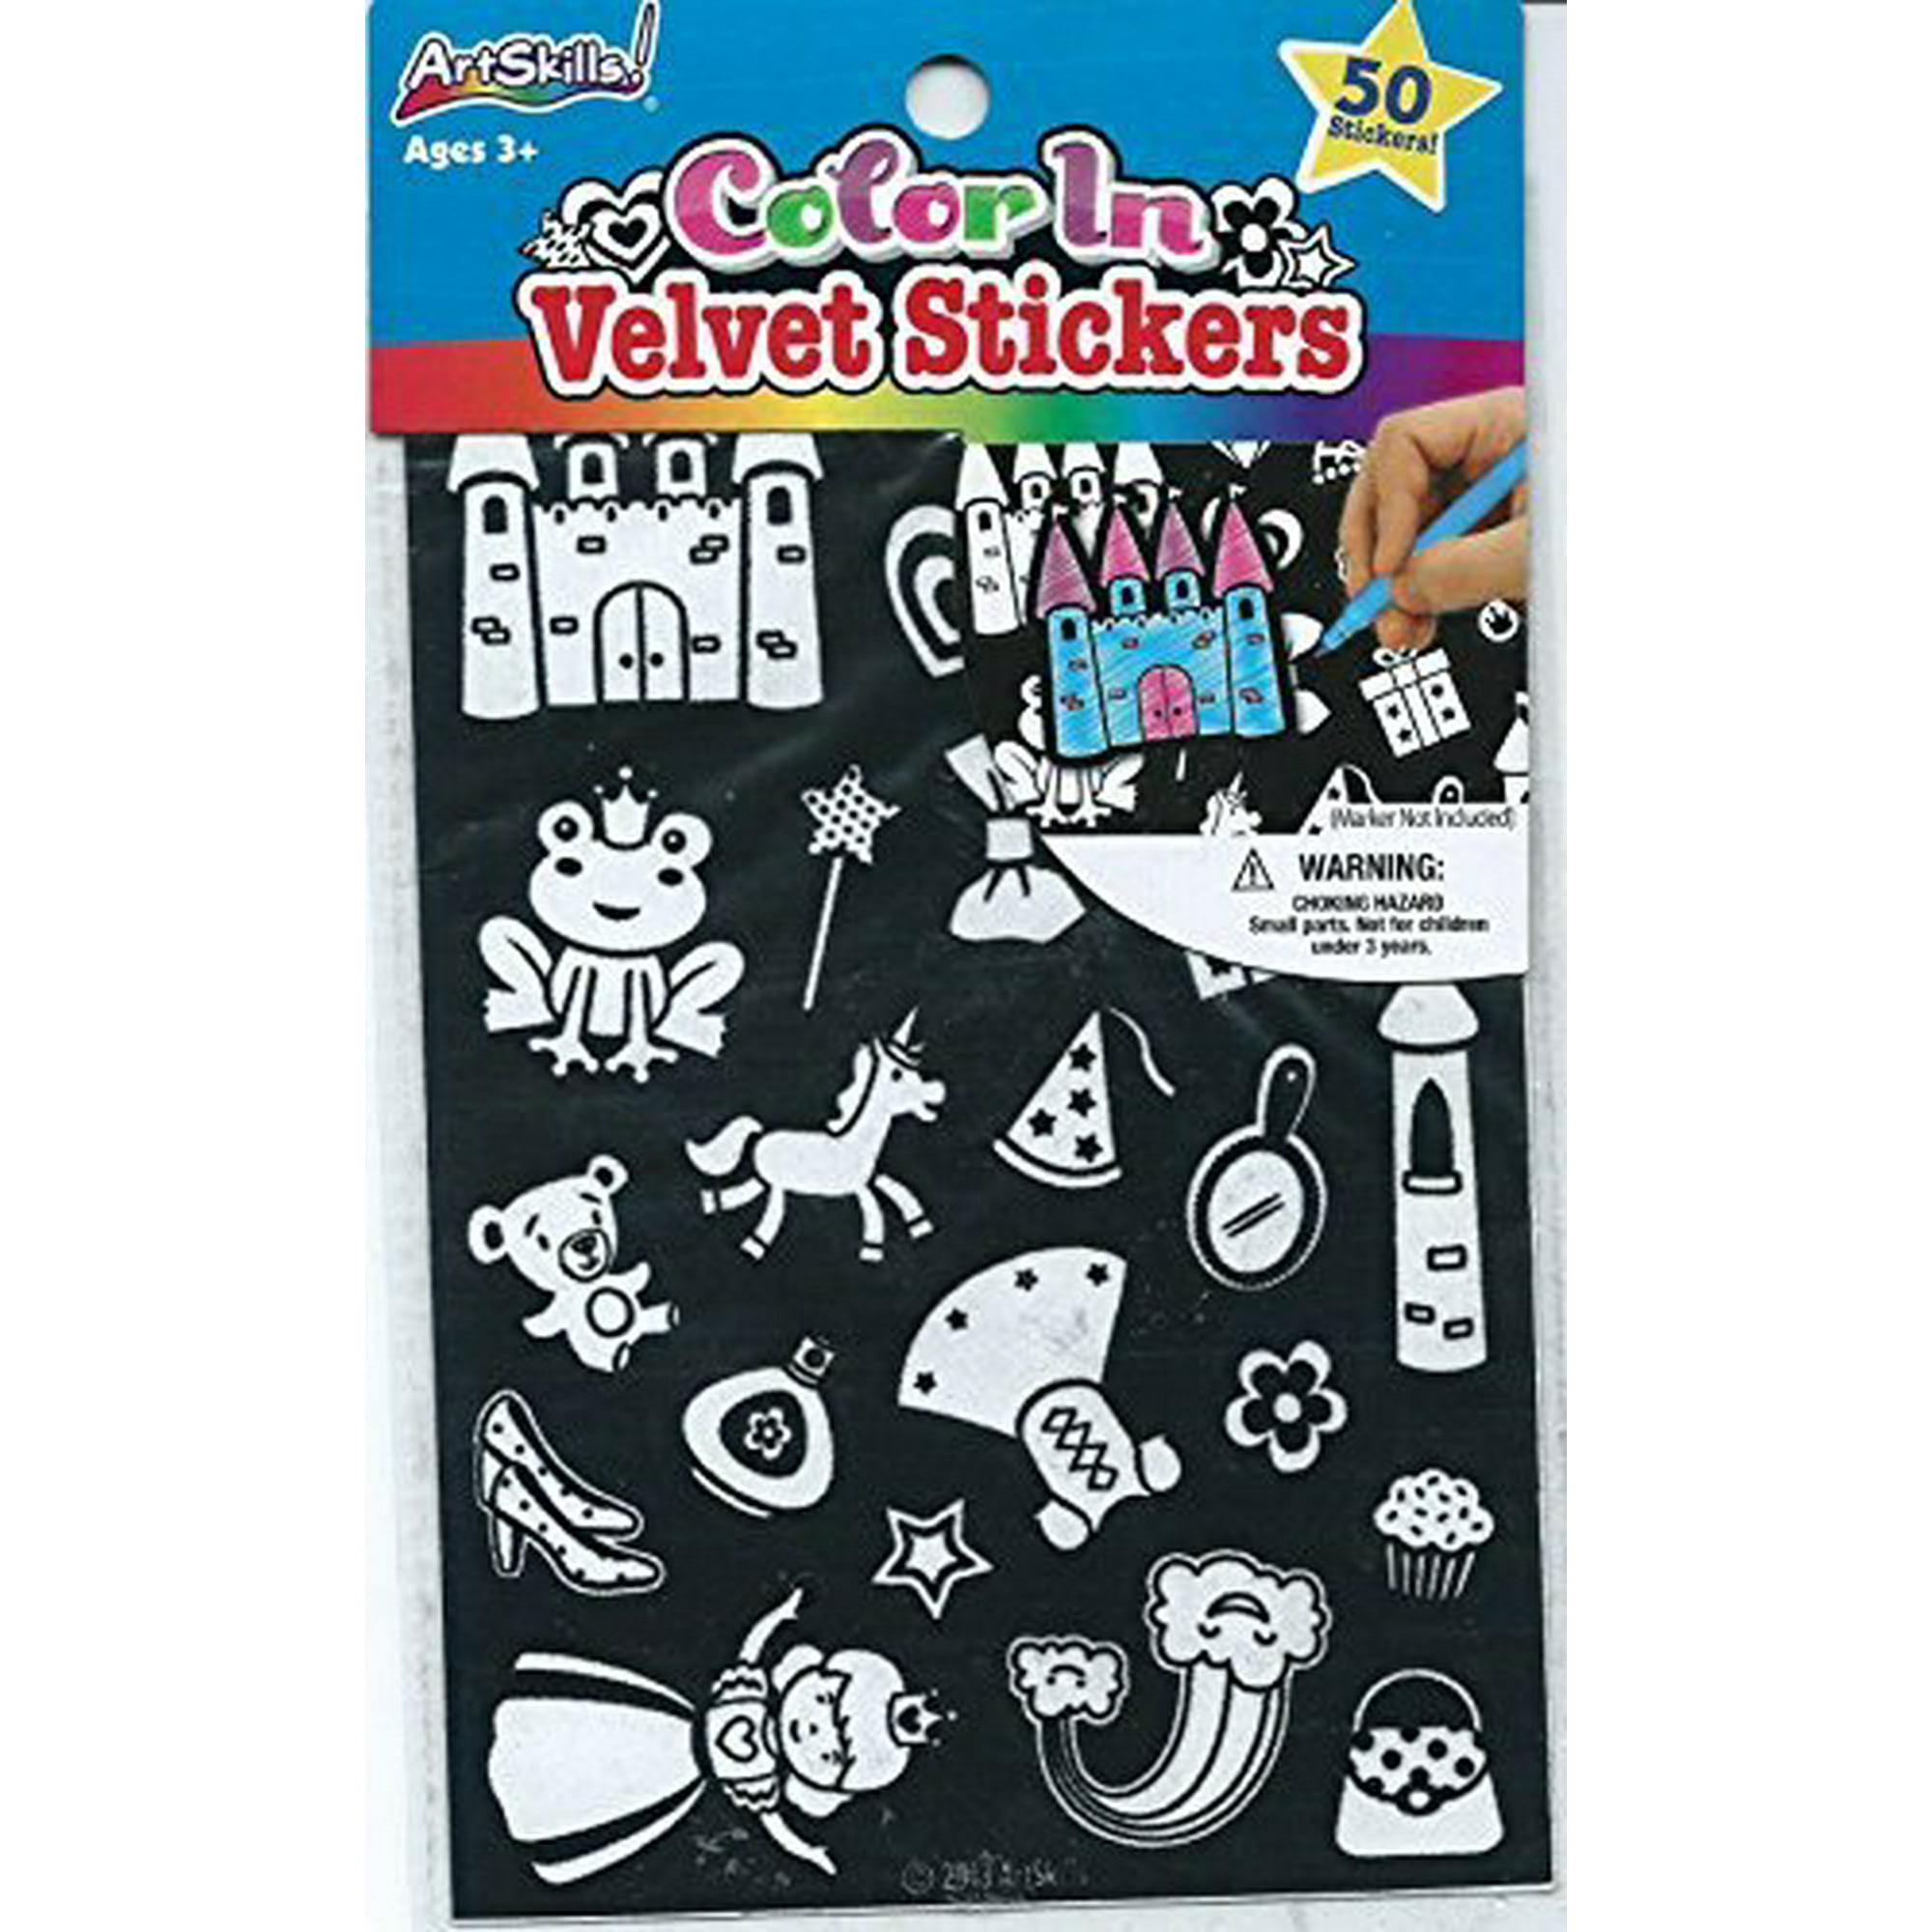 1 pack of 2 sheets 50 total stickers ArtSkills Color In Velvet Fairy Tale Princess Castle Stickers 